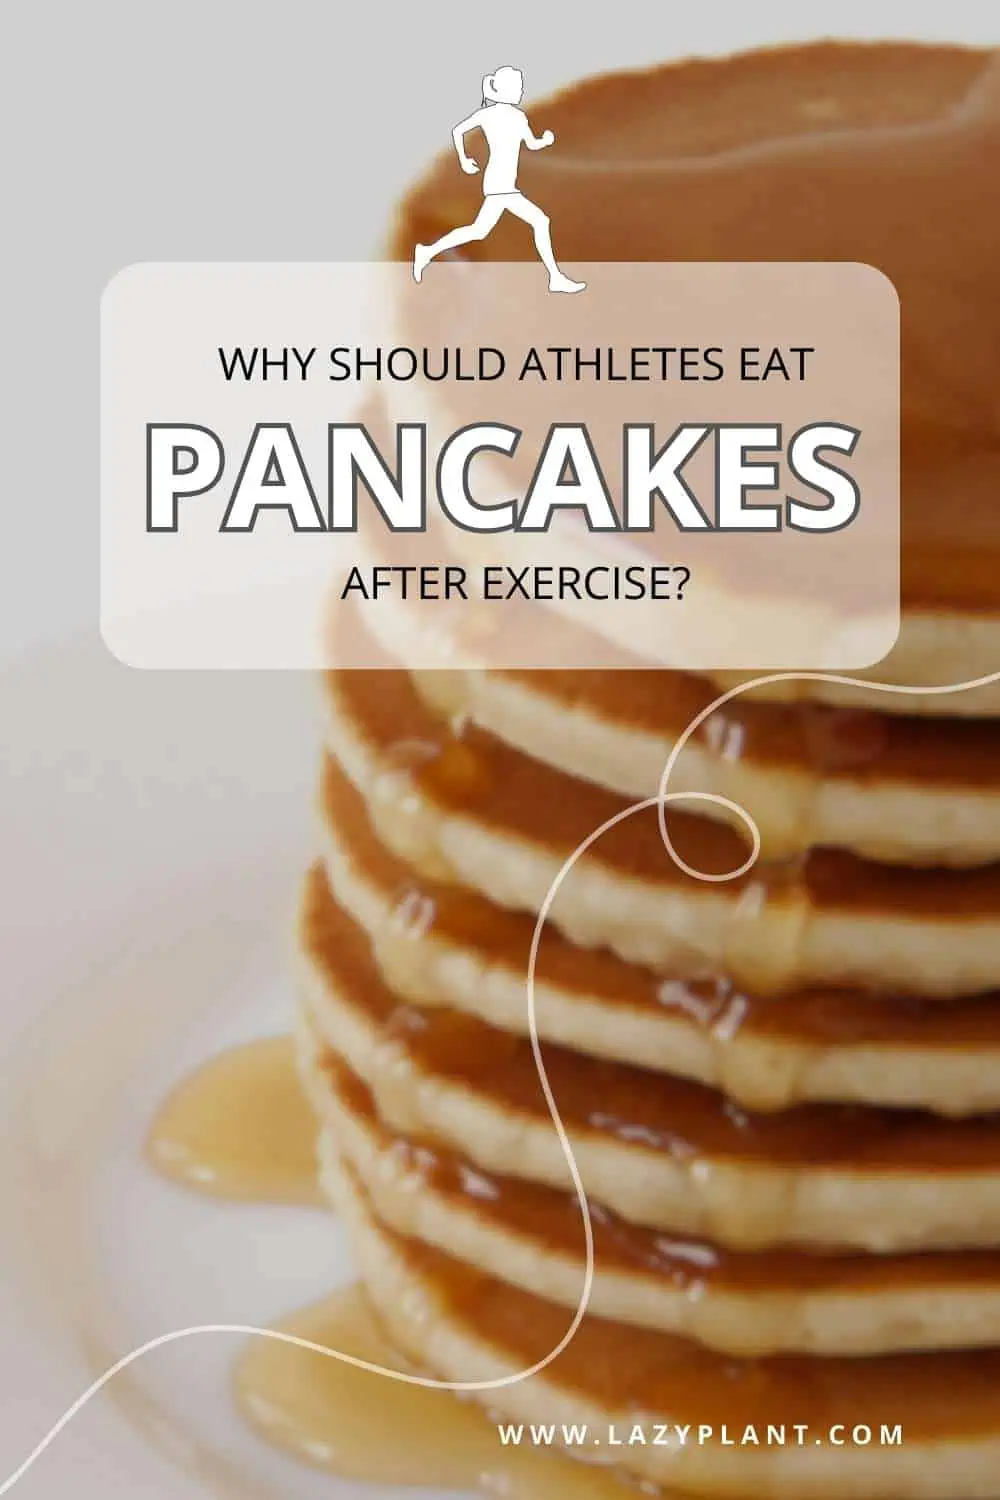 Why should bodybuilders, runners, and other endurance athletes eat pancakes every morning or after a workout?